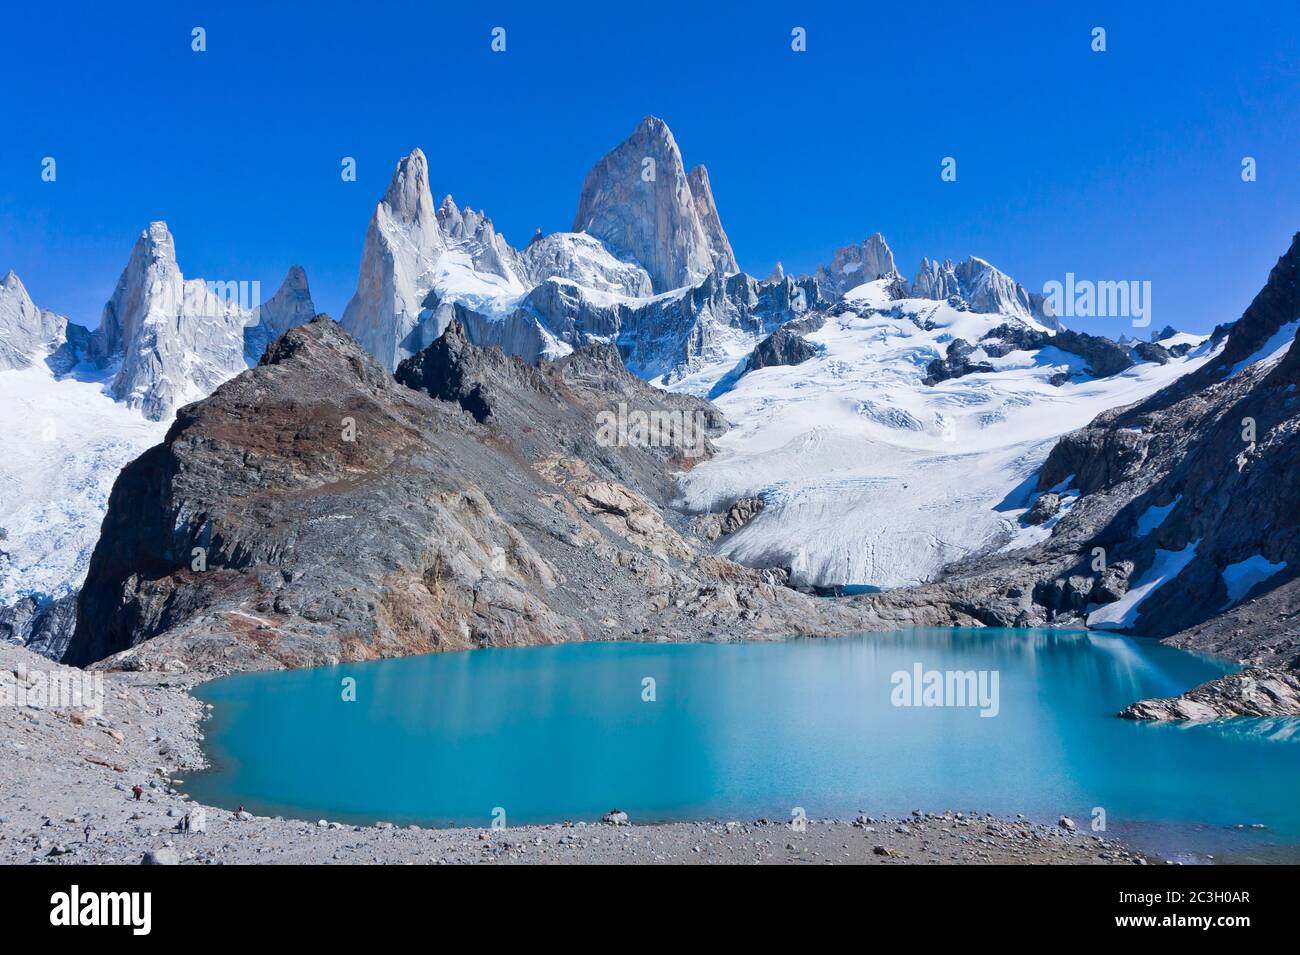 Natural landscape around Monte Fitz Roy, Patagonia, Argentina, South America Stock Photo